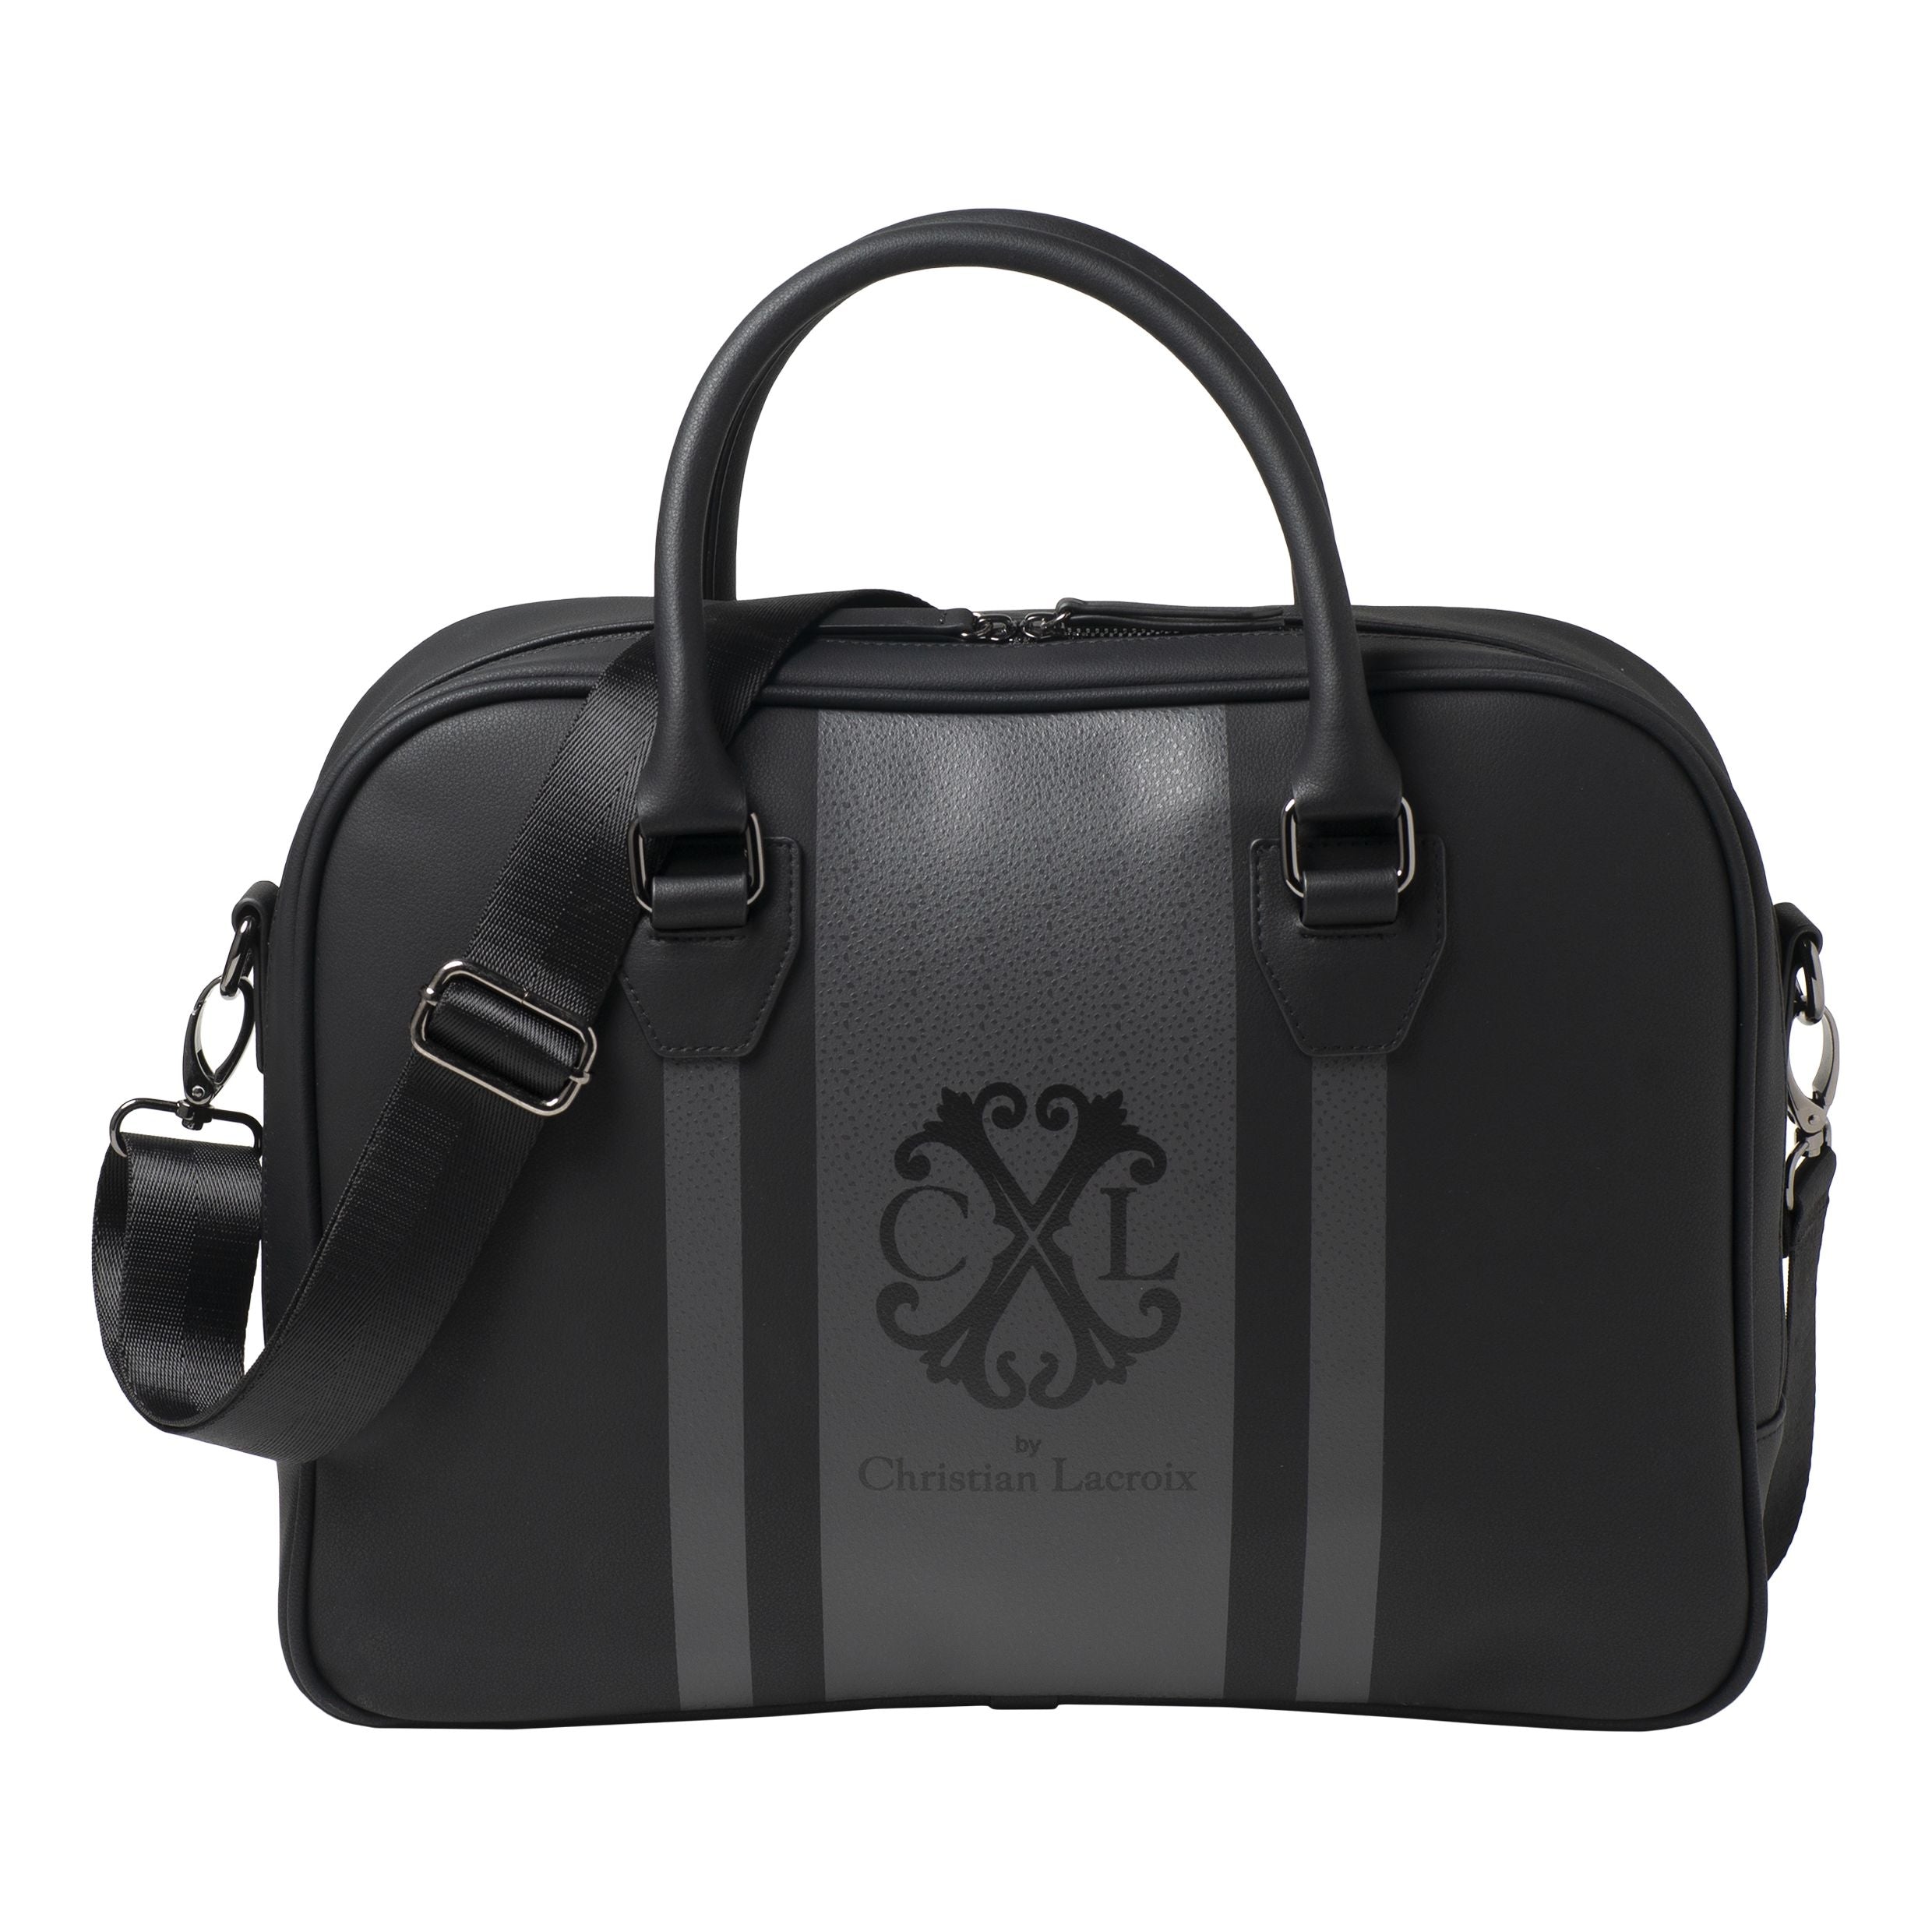 scald simply Mechanic Christian Lacroix Laptop bag | Id | Dark Grey | Gift for HIM – Luxury  Corporate Gifts | B2B Gifts Shop HK